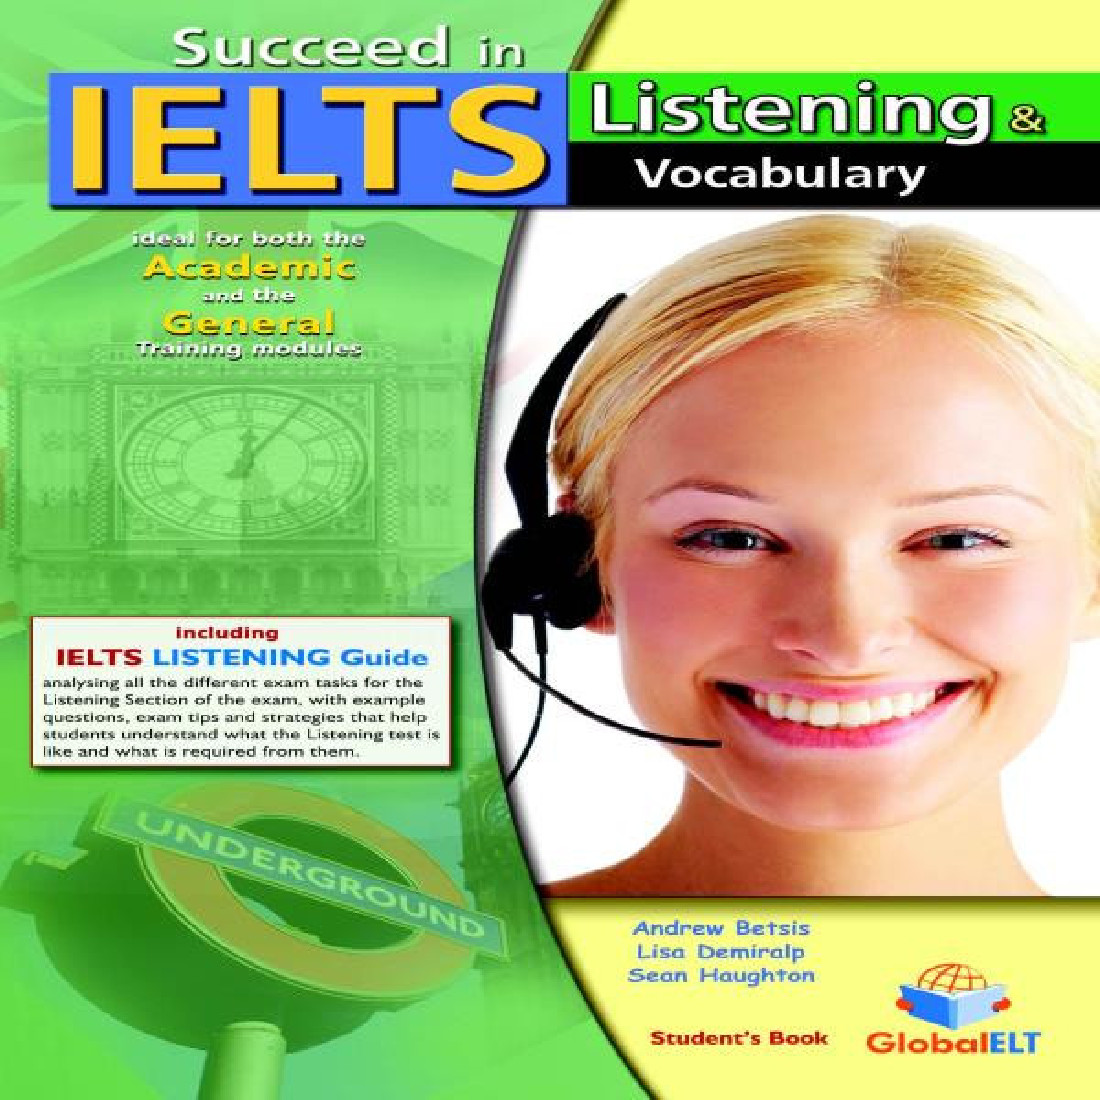 SUCCEED IN IELTS LISTENING & VOCABULARY STUDENTS BOOK